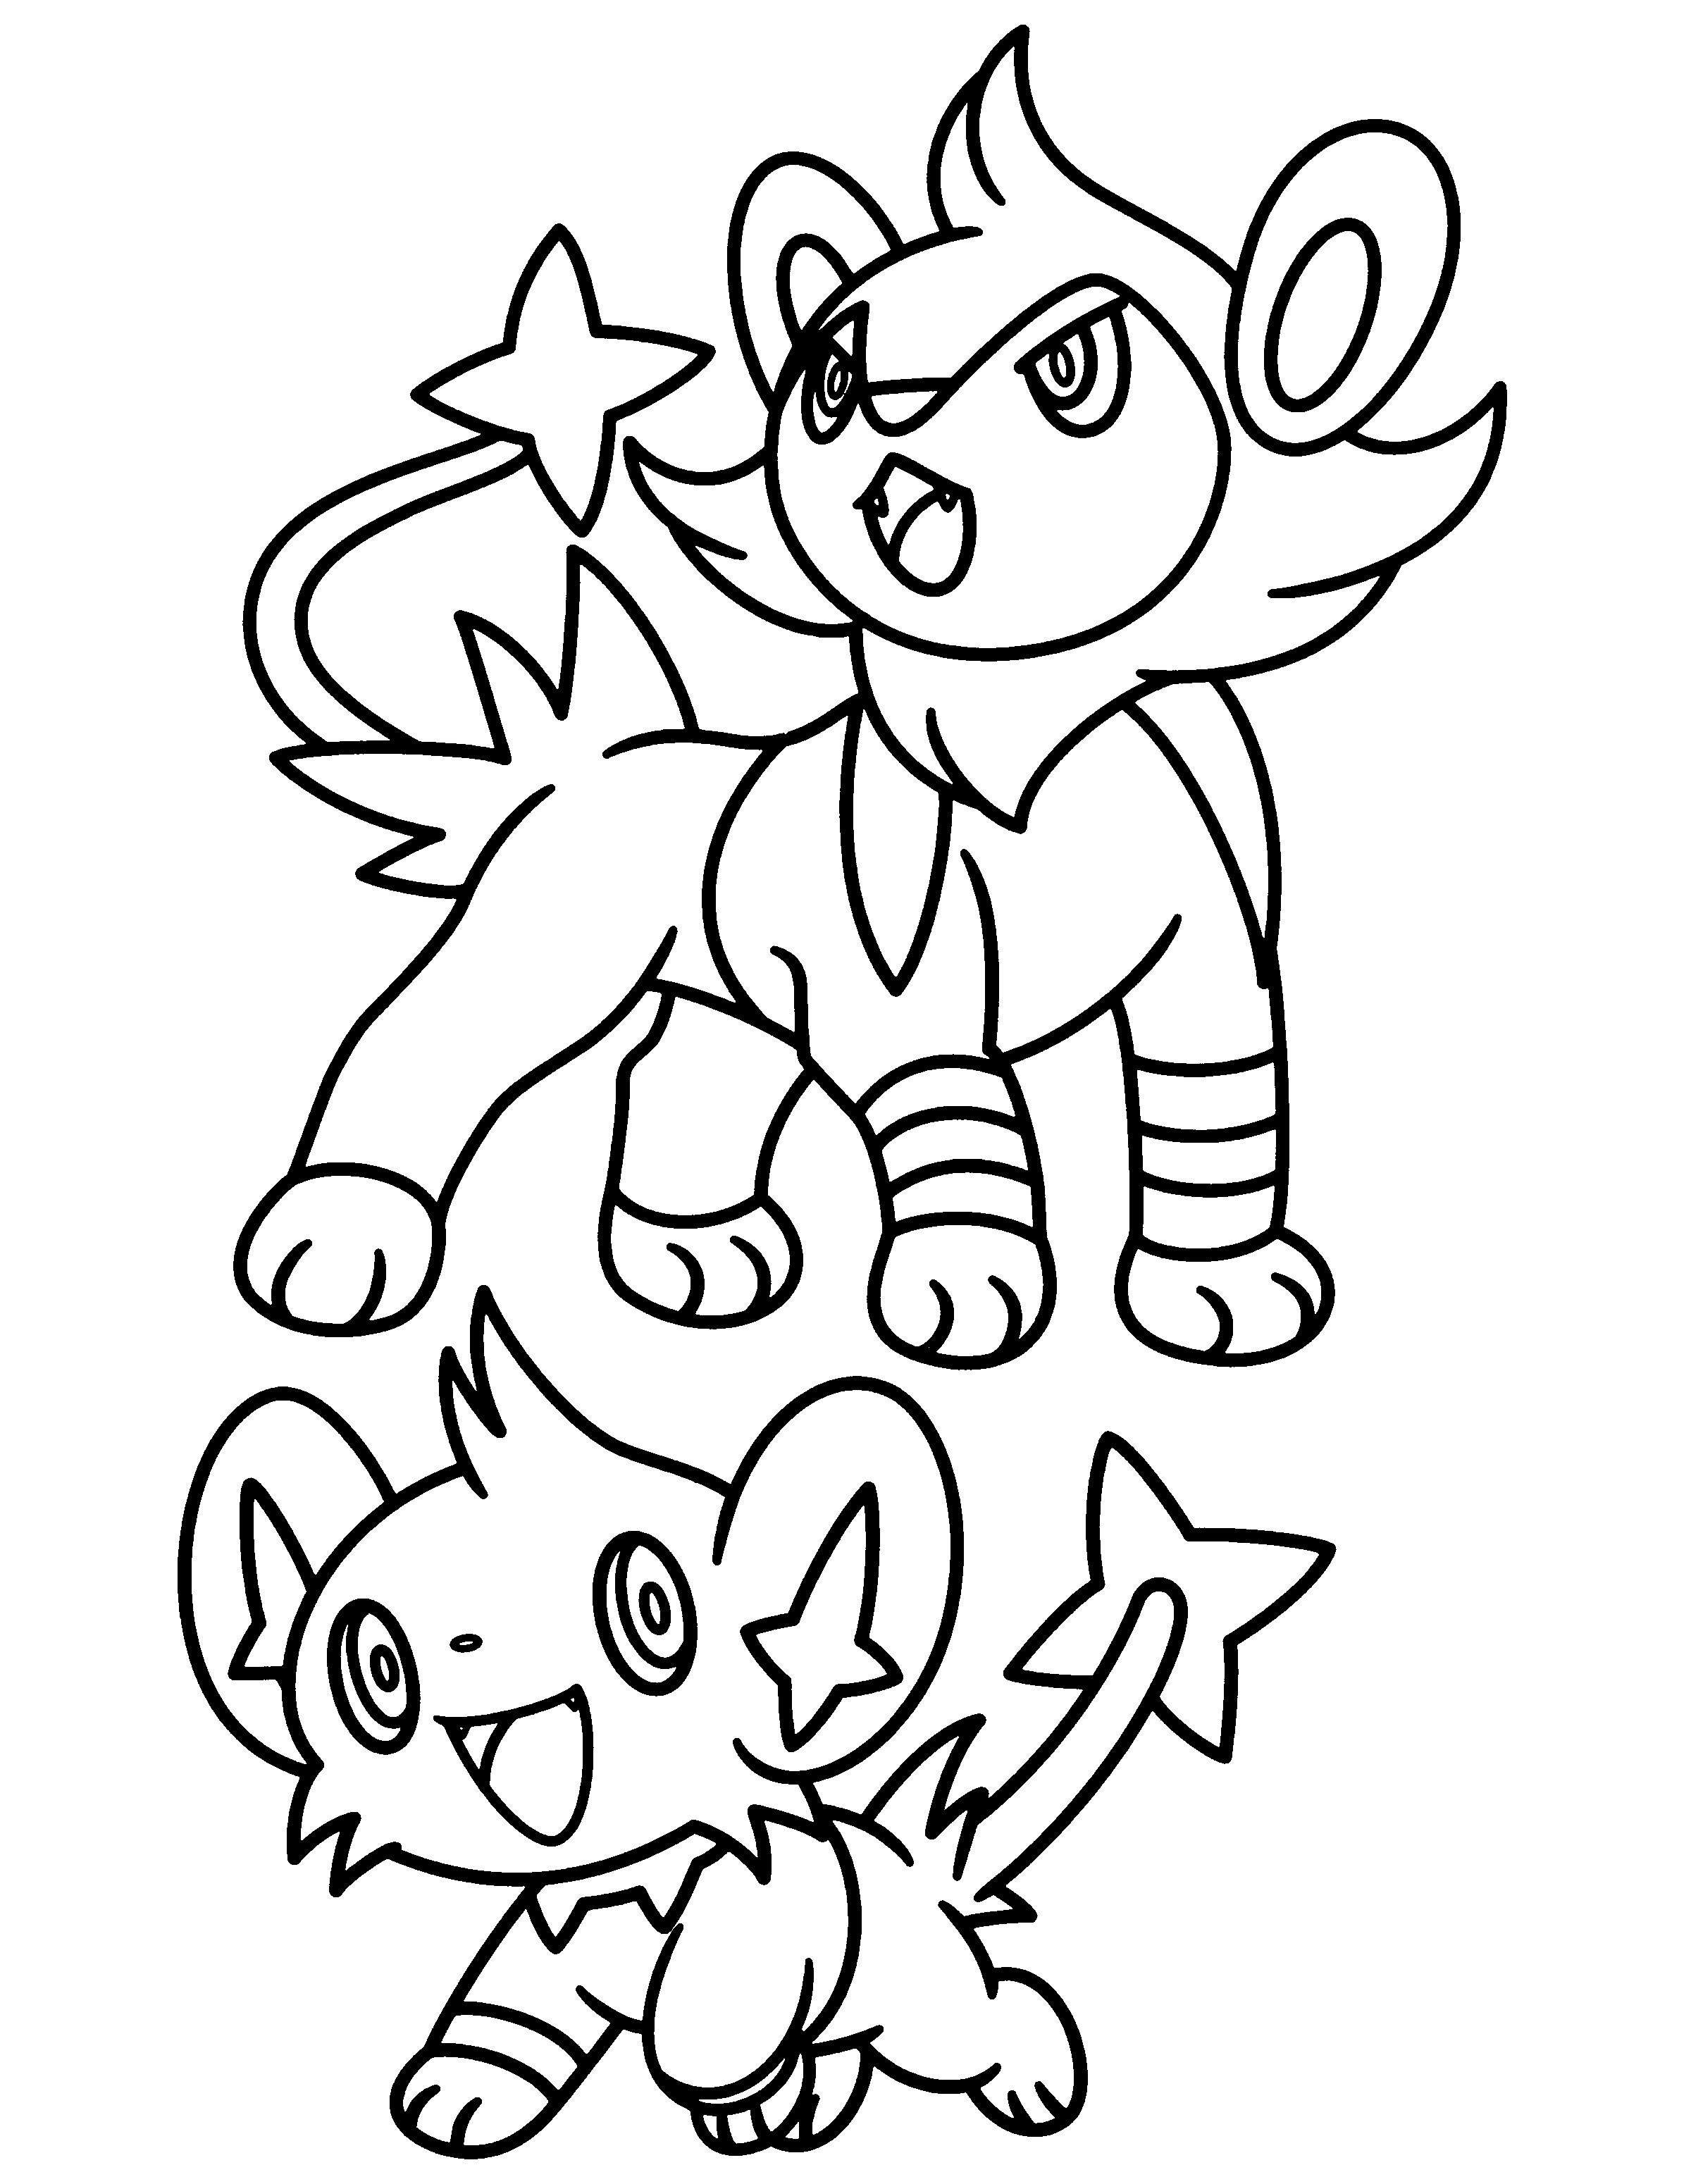 shinx coloring pages shinx coloring page pages shinx coloring 